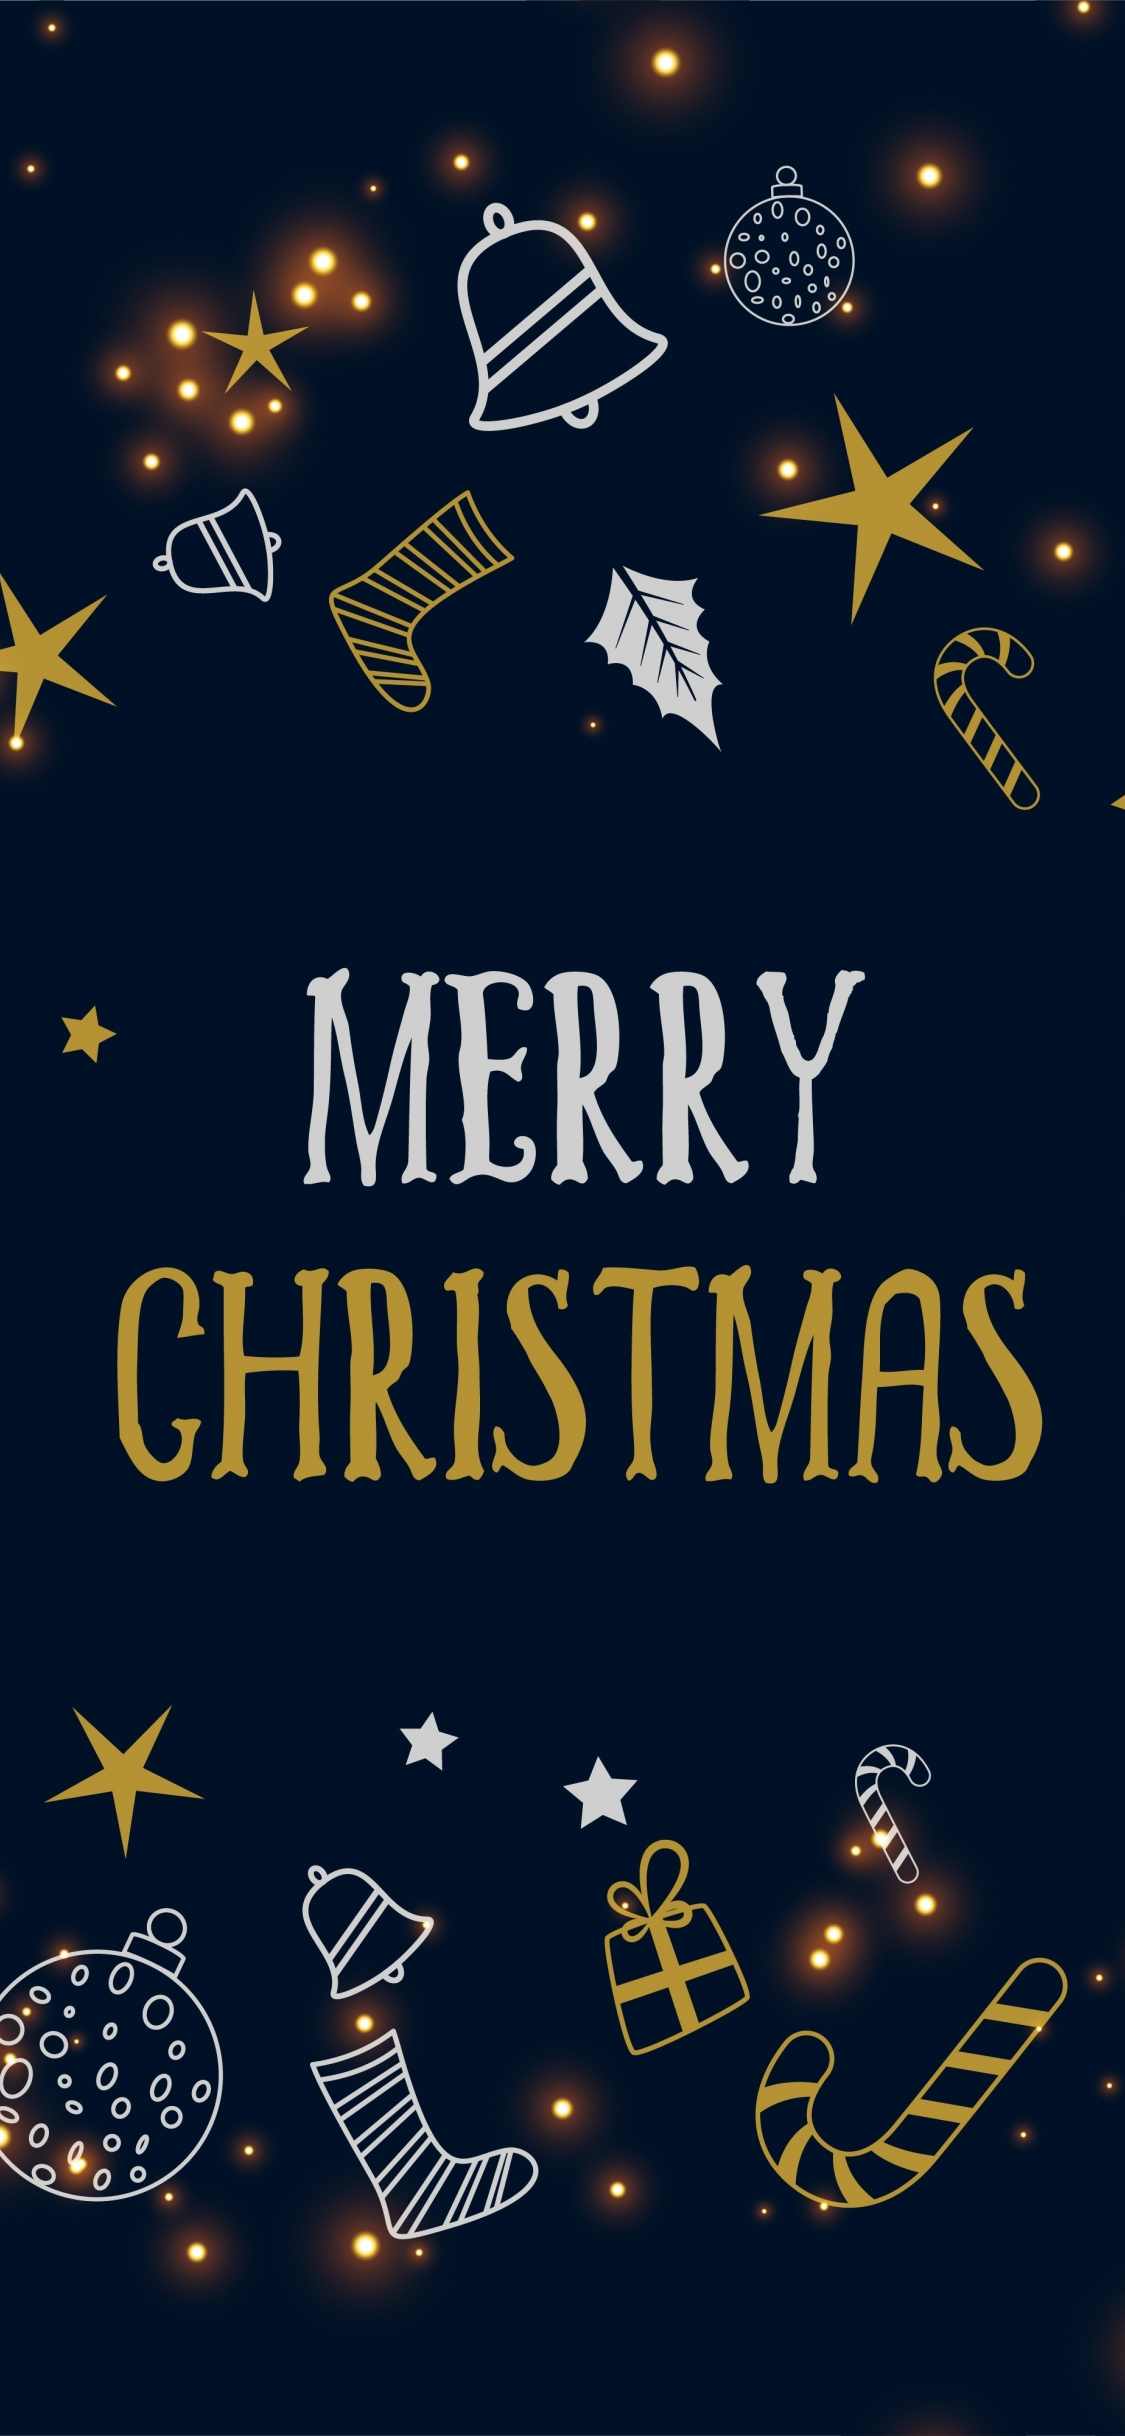 Download 1125x2436 wallpaper 2019 merry christmas, abstract, iphone x 1125x2436 HD image, background, 17312